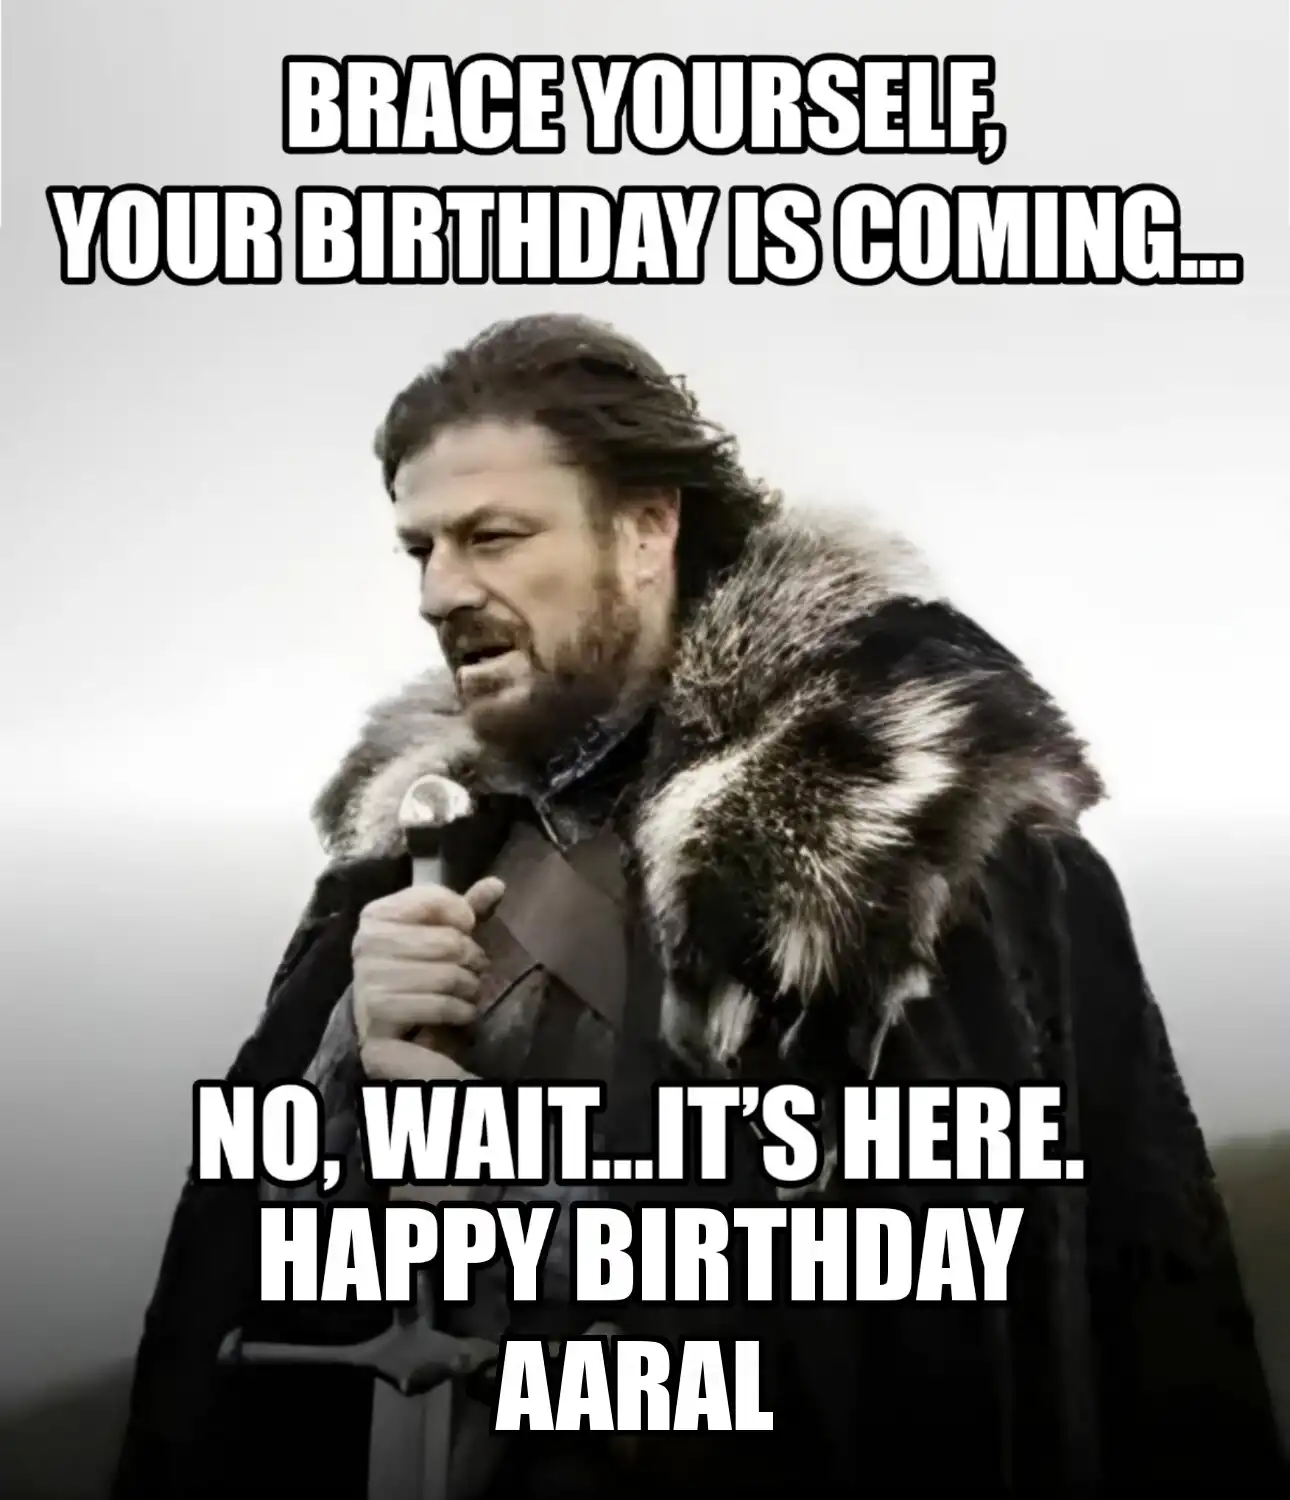 Happy Birthday Aaral Brace Yourself Your Birthday Is Coming Meme